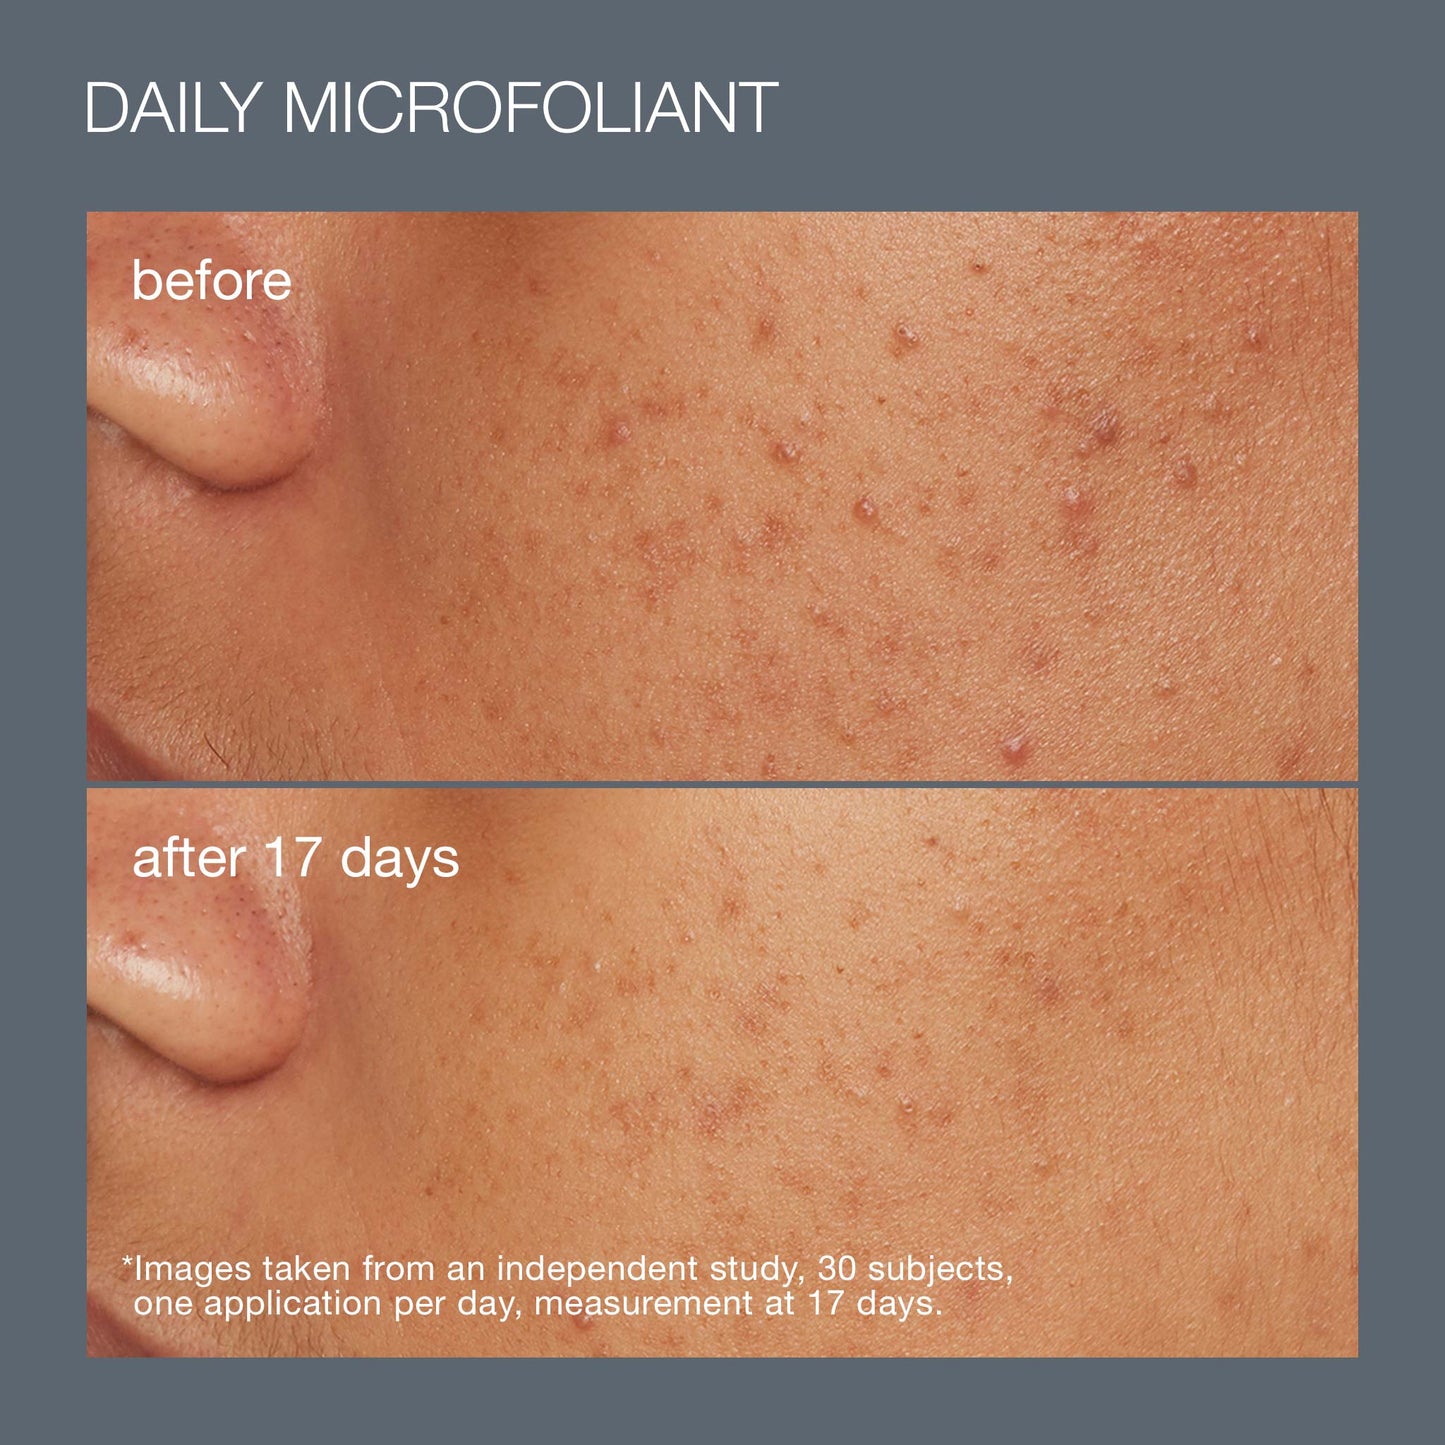 daily microfoliant before and after